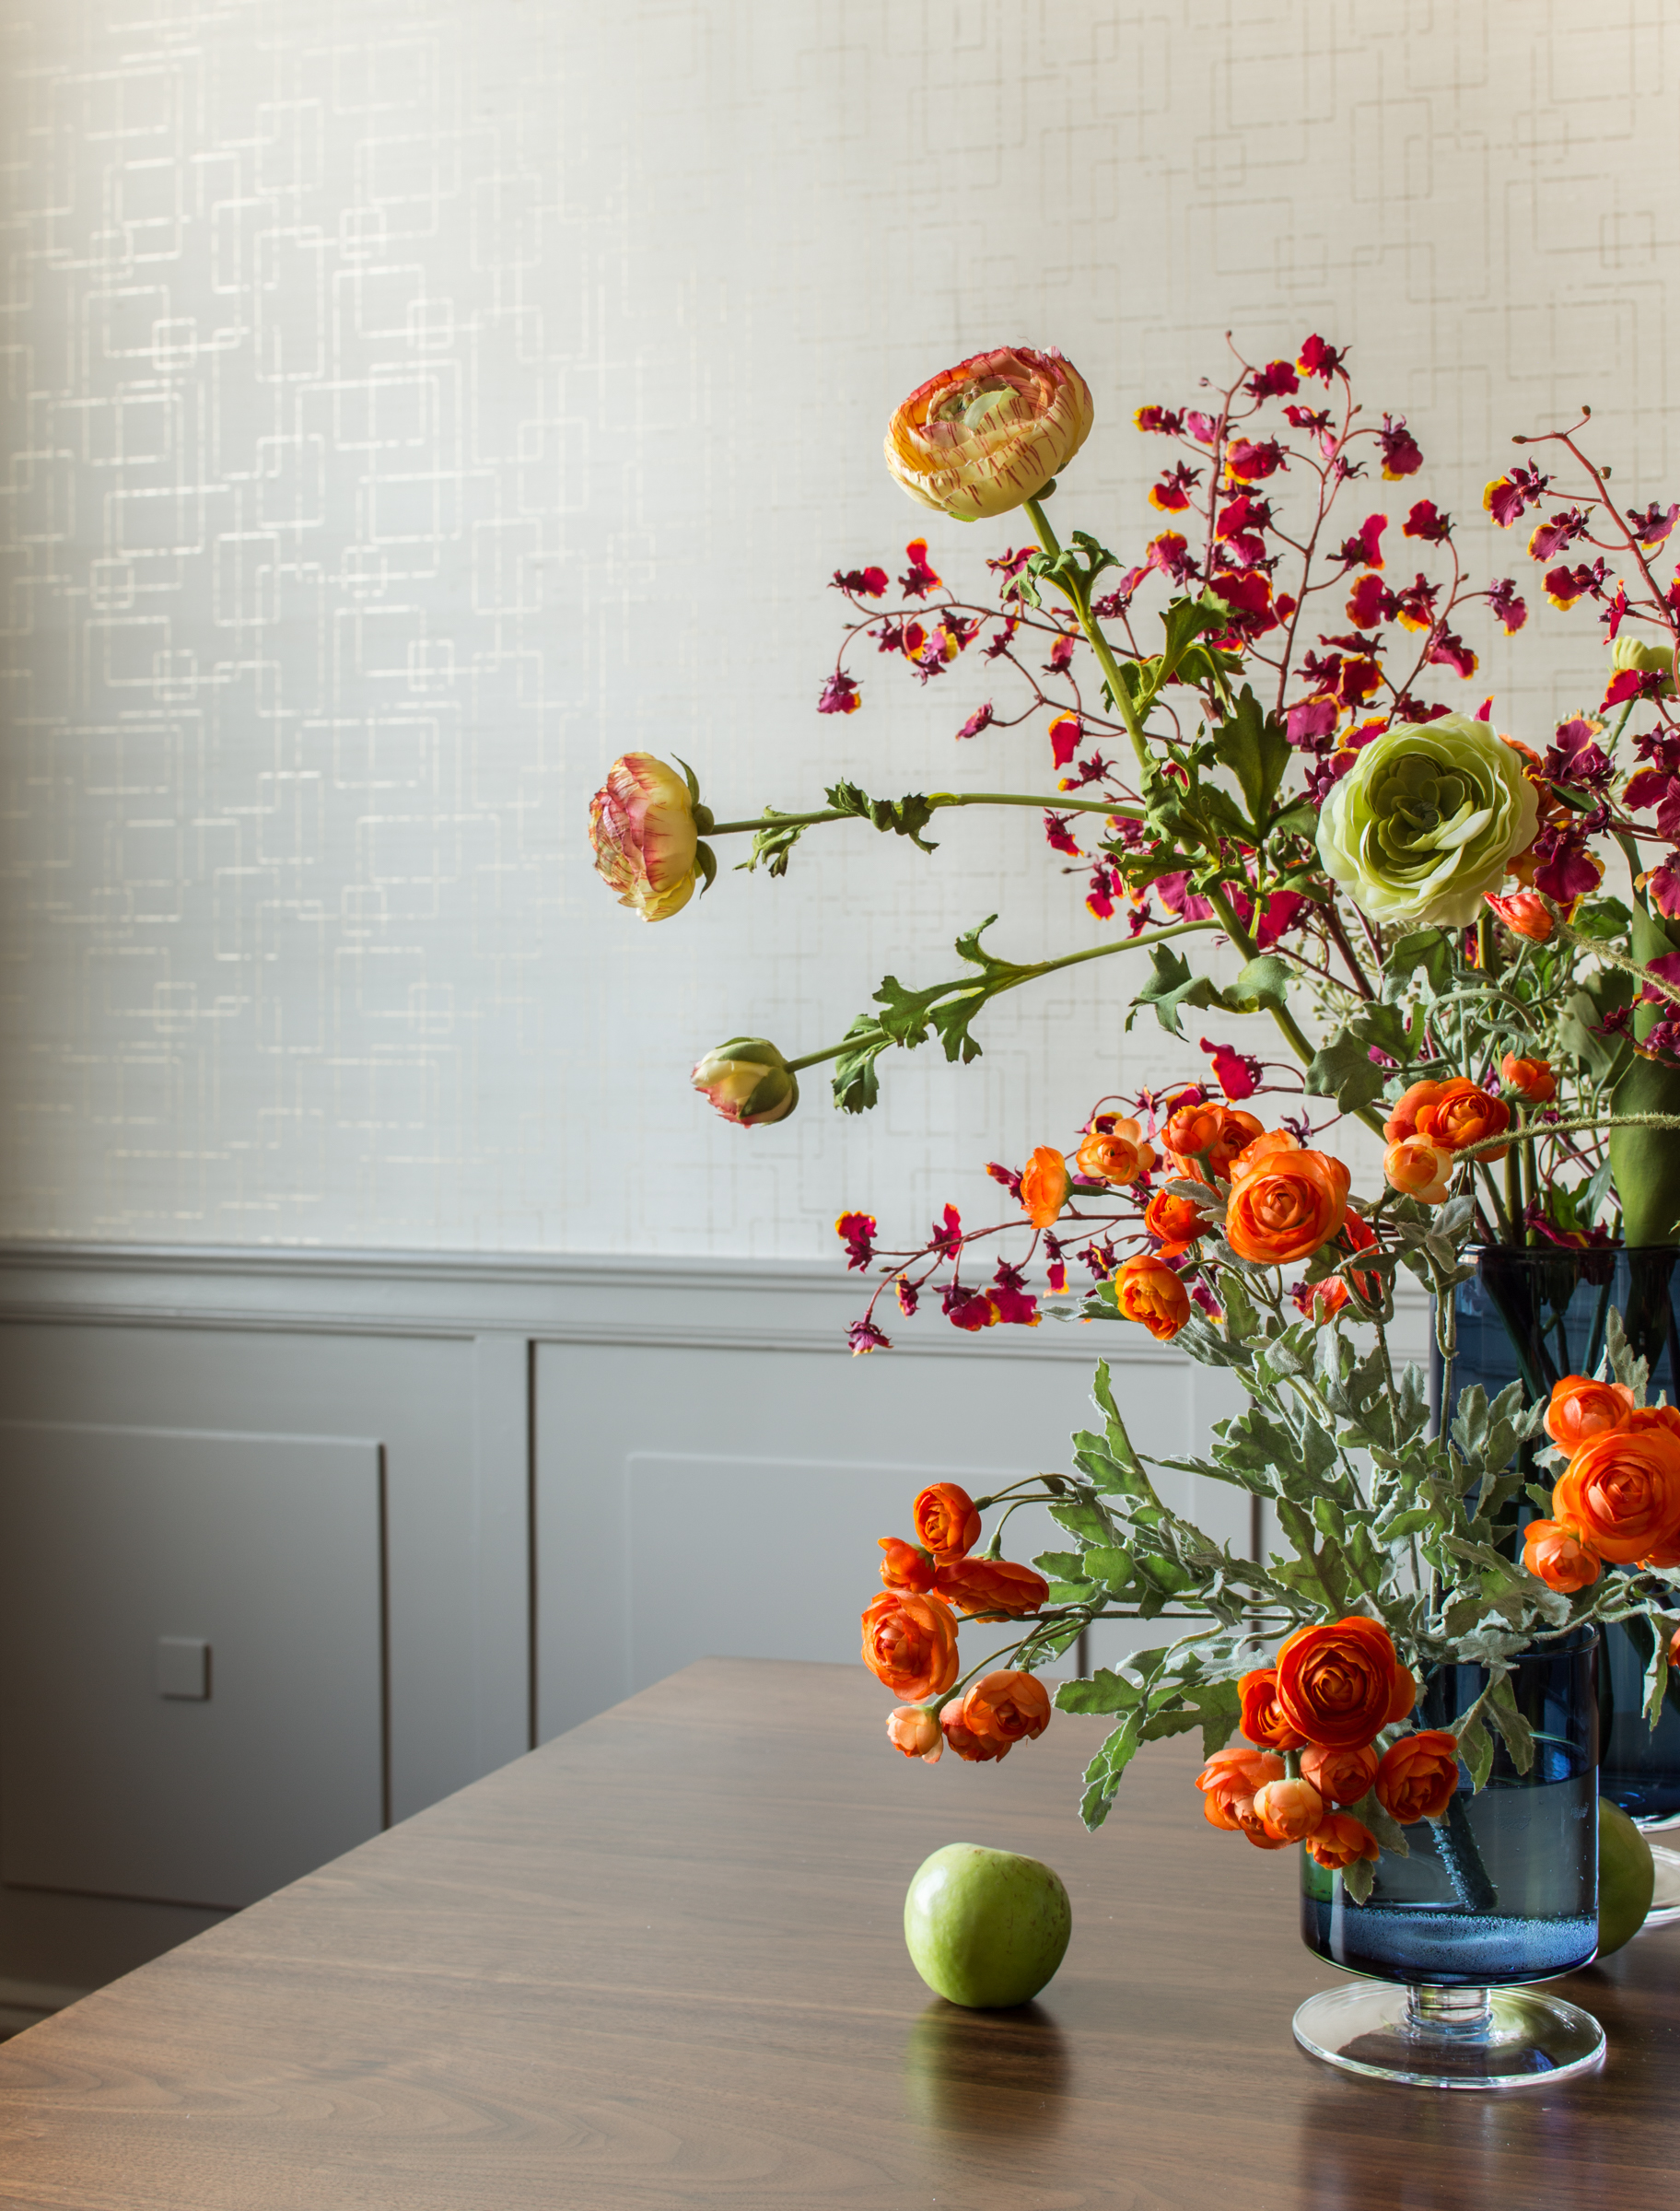 flowers in a blue vase in front of a textured painted white wall with wainscoting